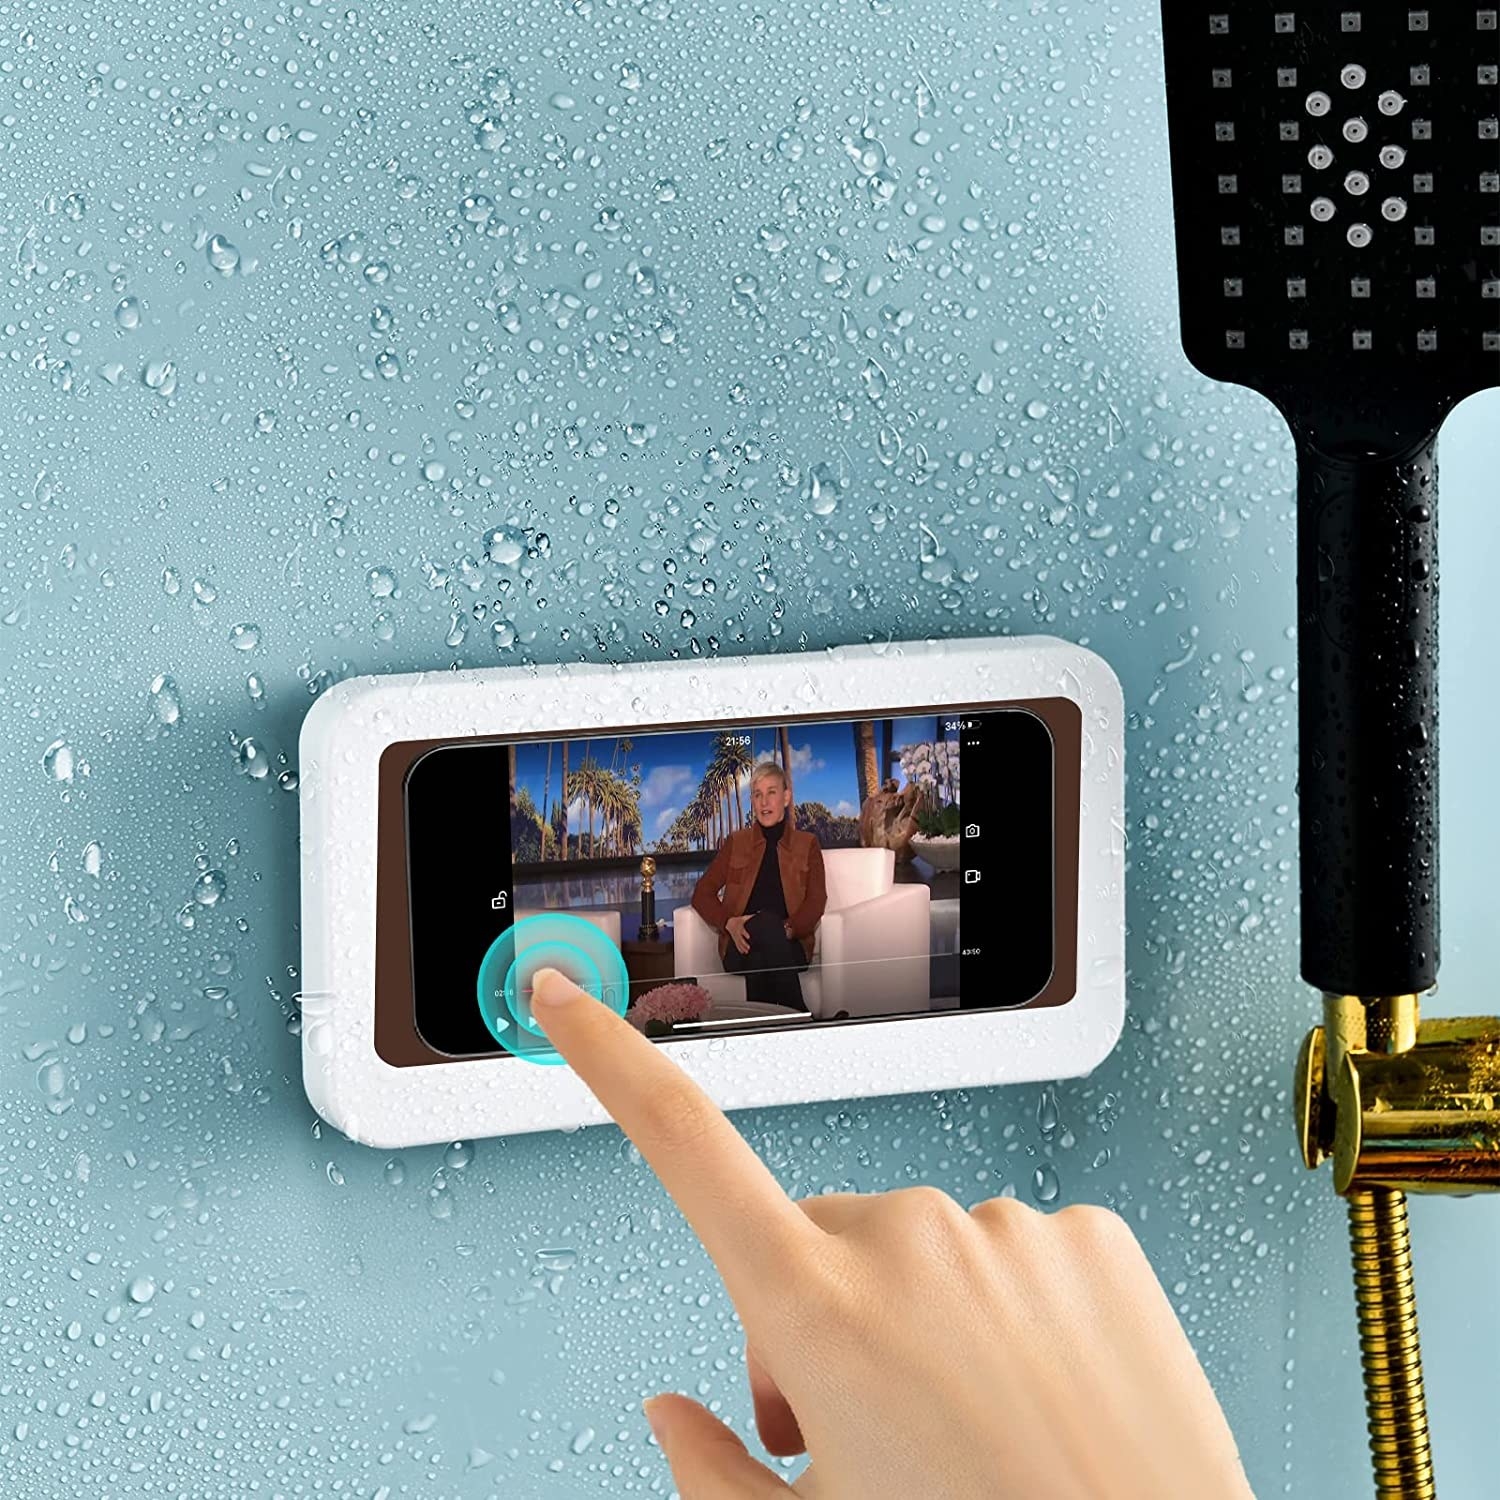 Model&#x27;s hand touching a phone screen while it&#x27;s inside the waterproof mount in the shower